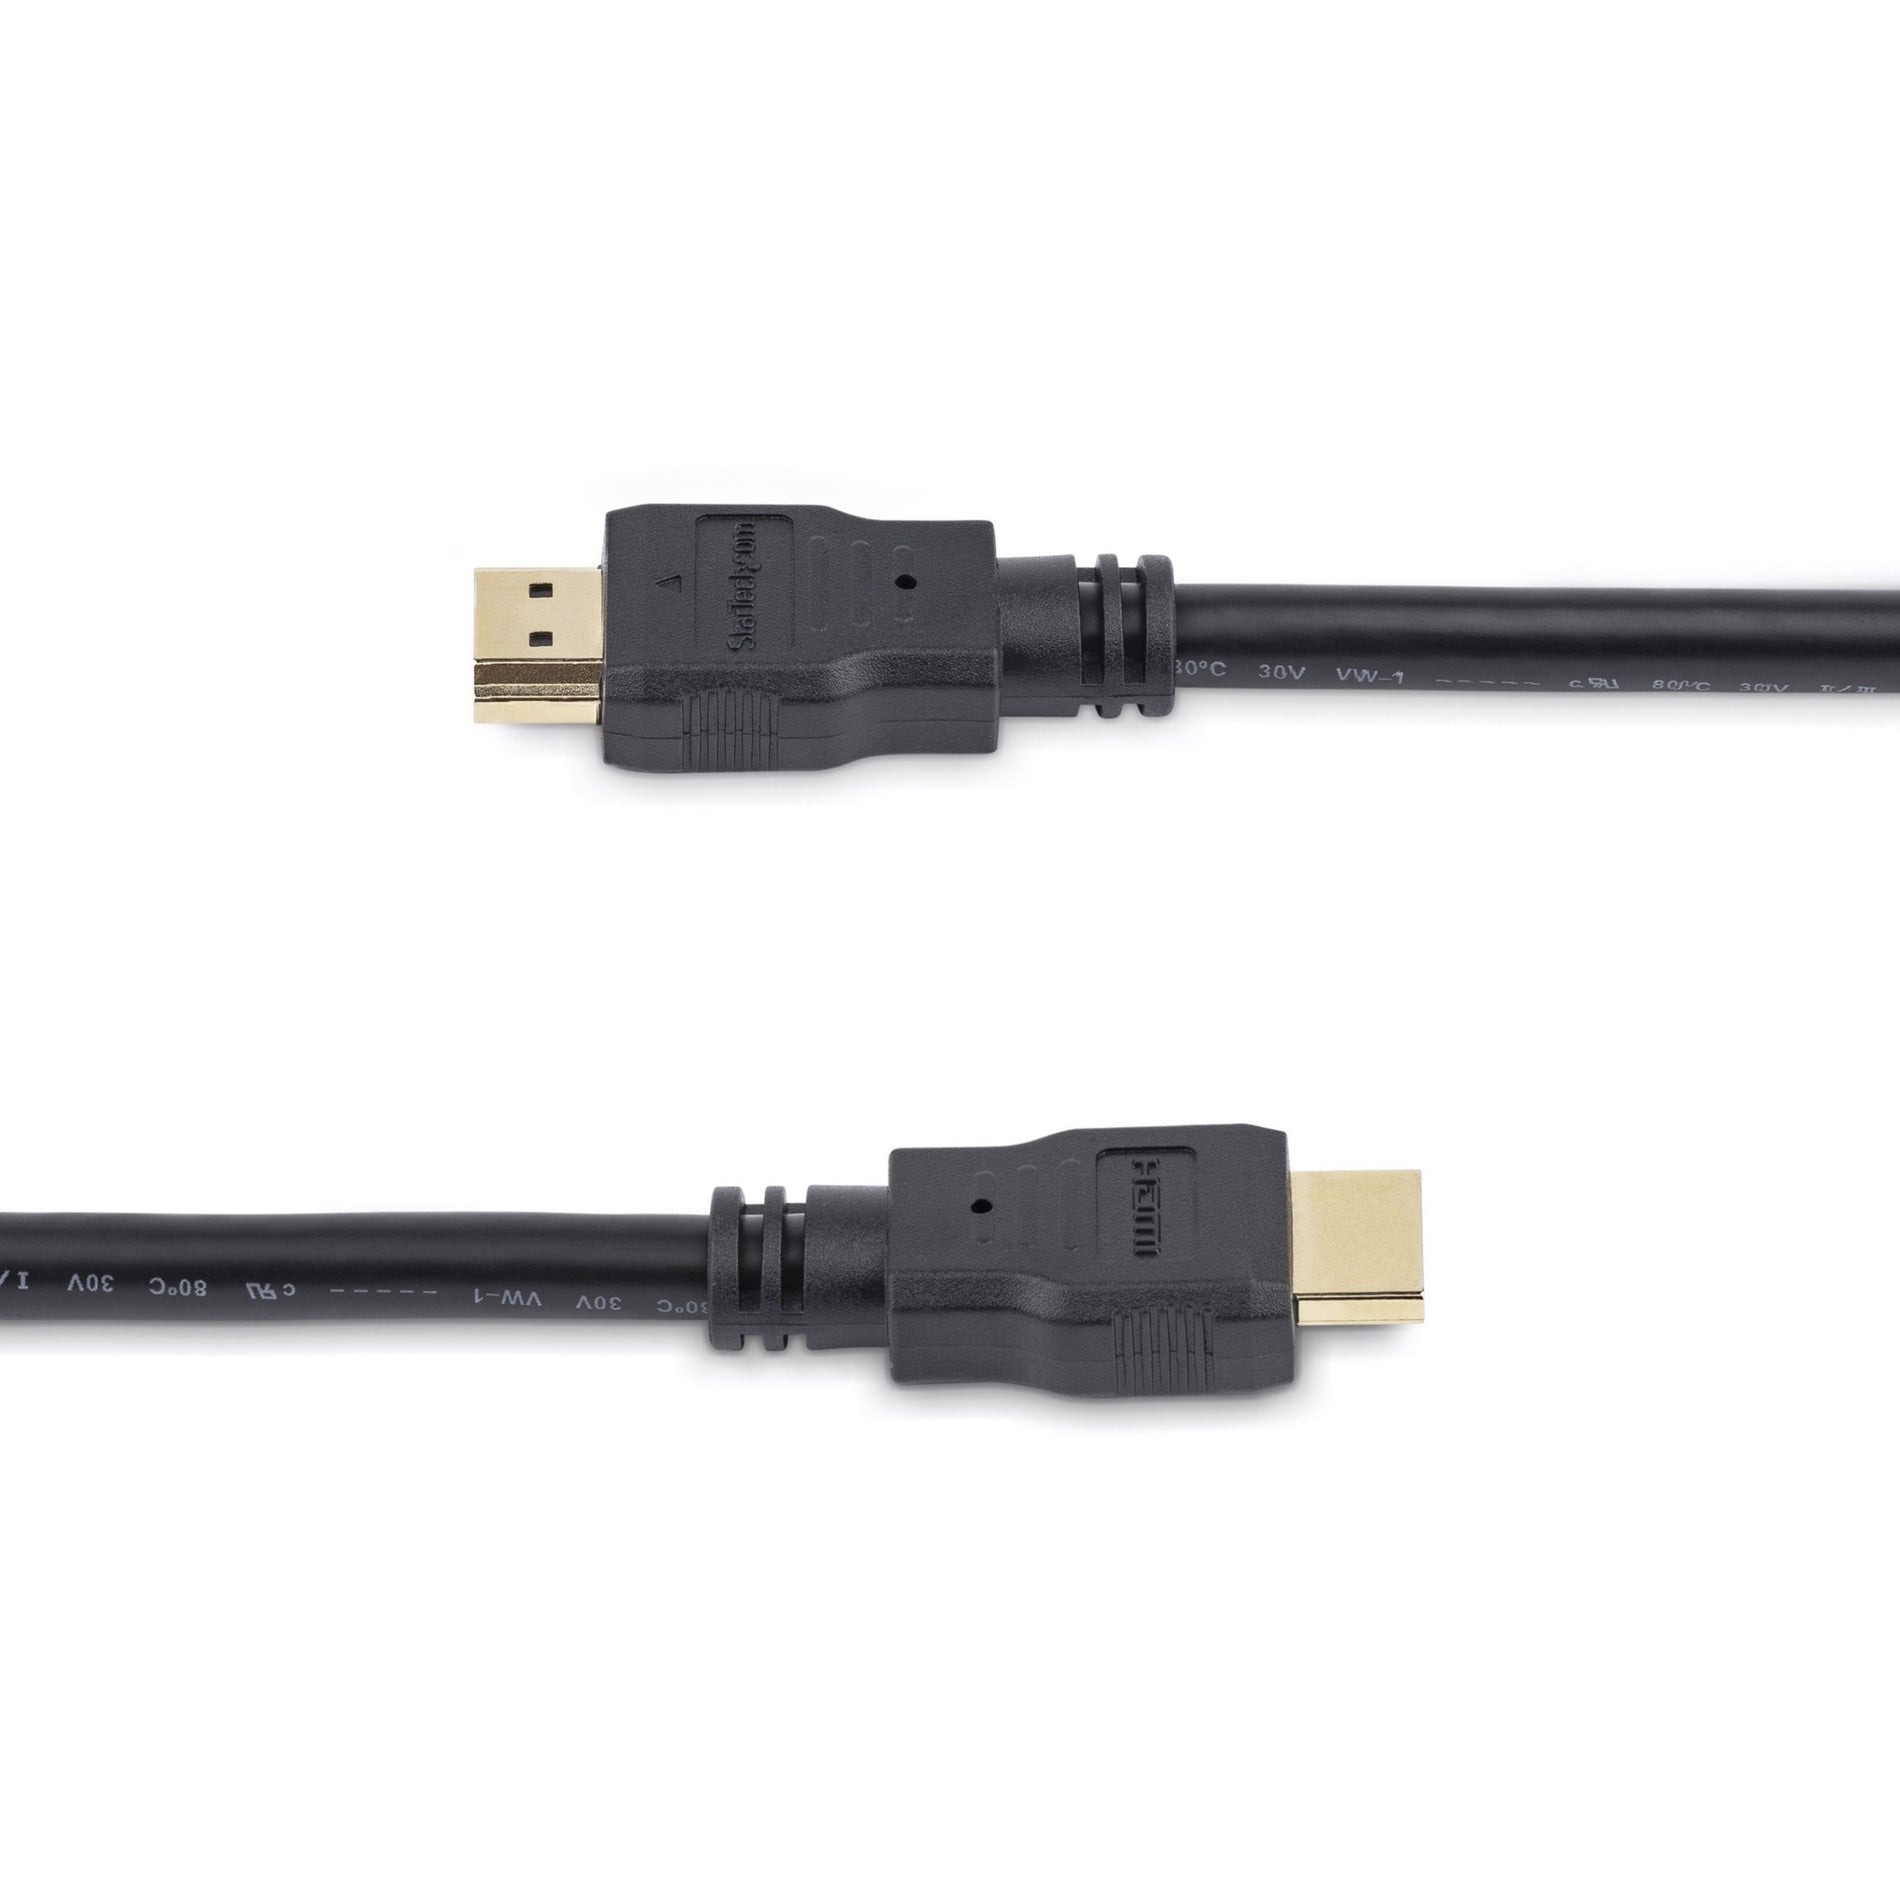 StarTech.com HDMM12 12 ft High Speed HDMI Cable - Ultra HD 4k x 2k HDMI Cable, Strain Relief, Corrosion-free, Molded, Gold Plated Connectors, Black